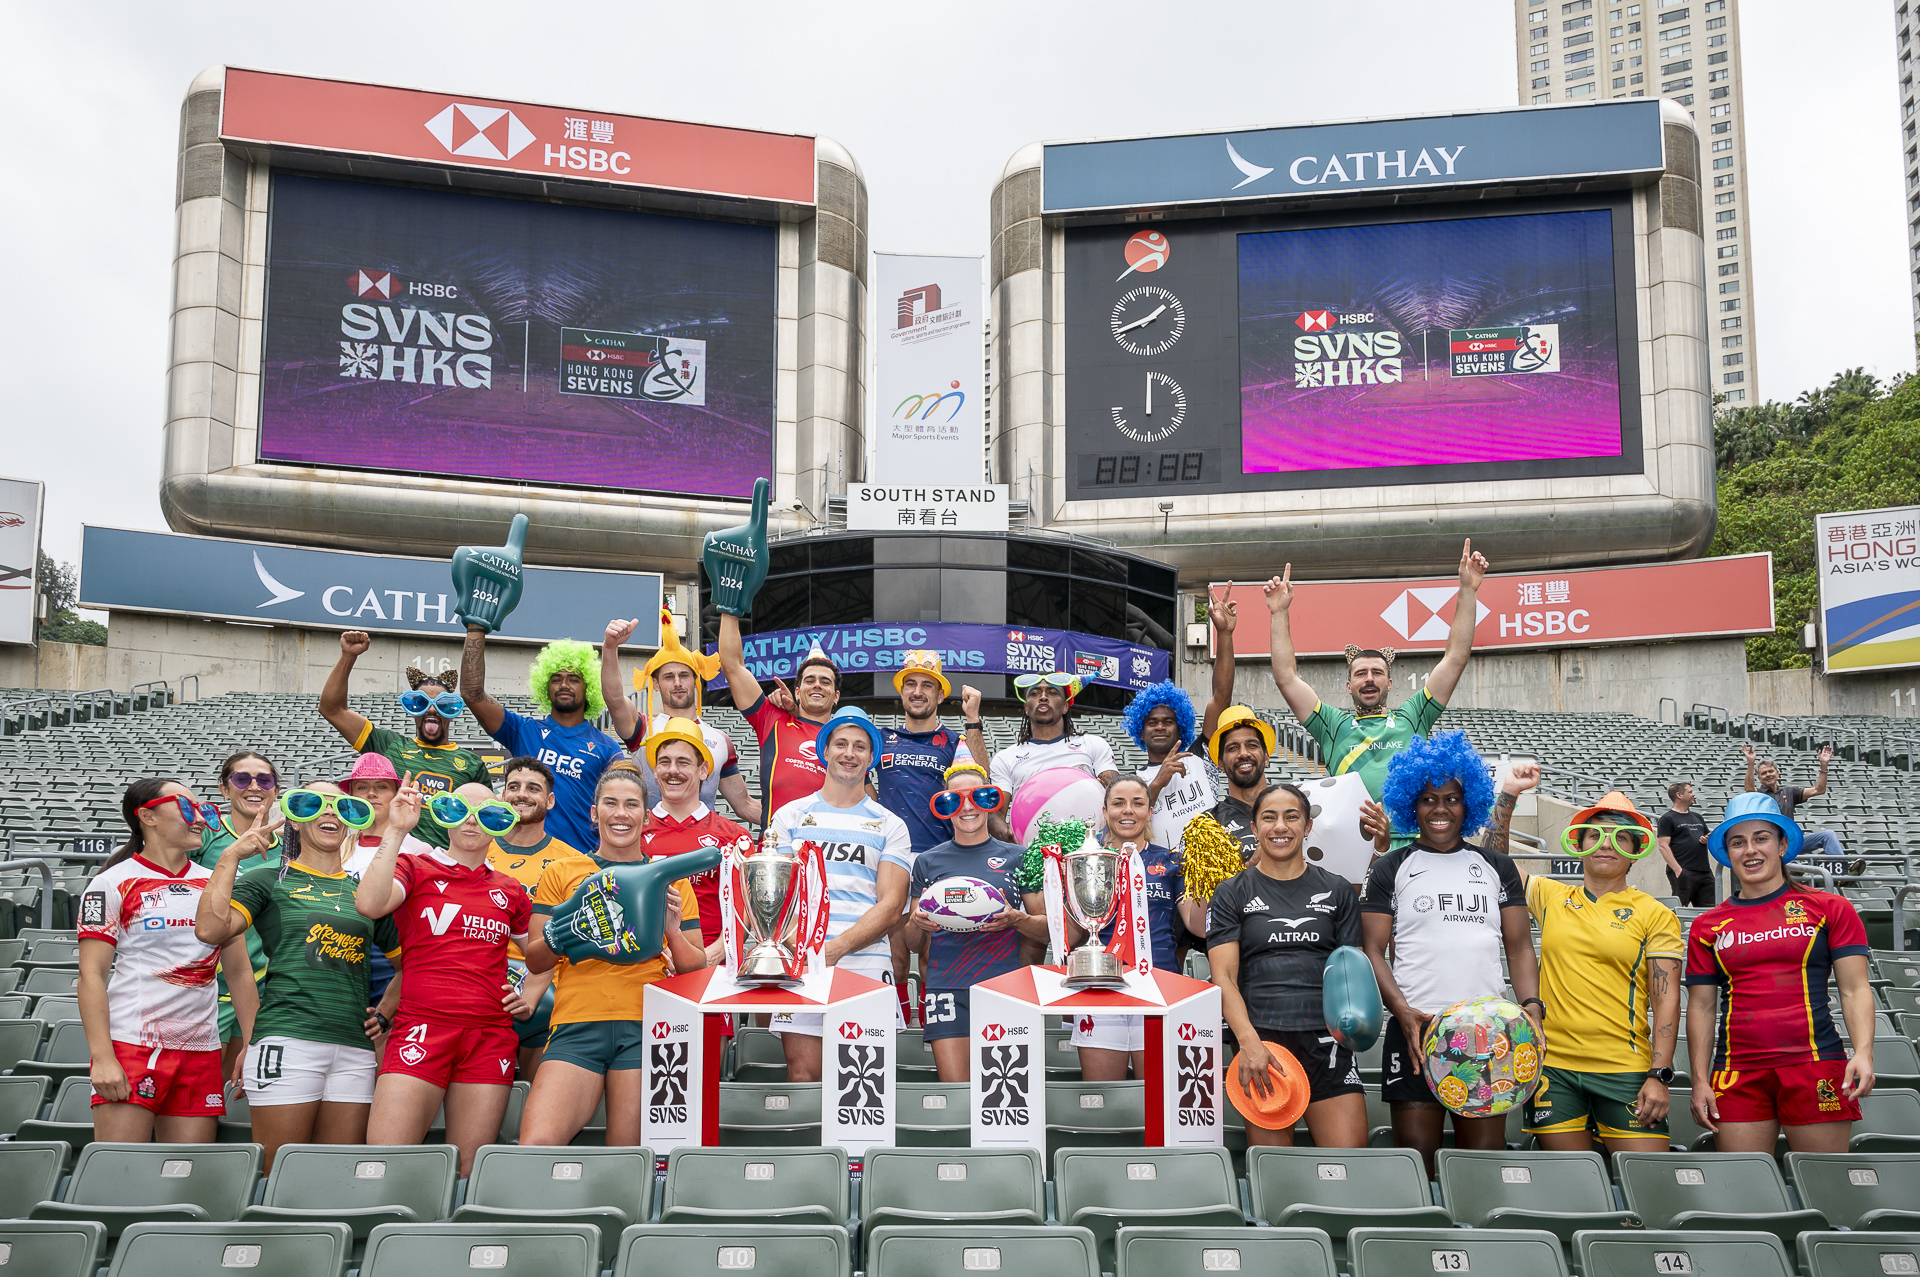 30 Captains Salute 30 years of Sevens in the Stadium as kick off of Cathay/HSBC Hong Kong Sevens 2024